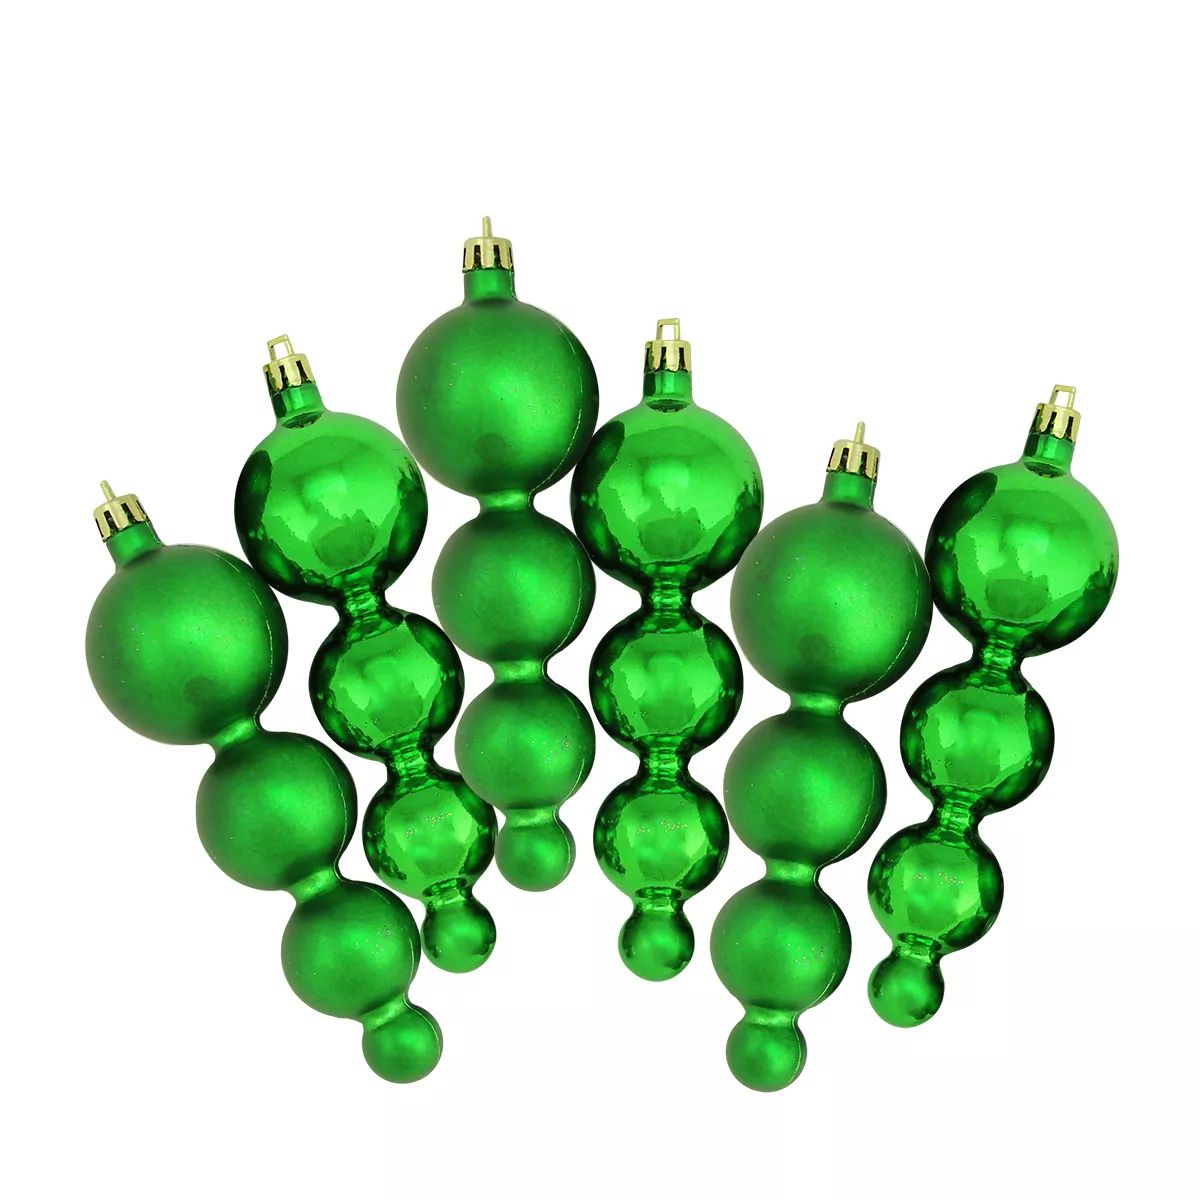 Northlight 6ct Shiny and Matte Finial Shatterproof Christmas Ornament Set 5.75" - Green | Target